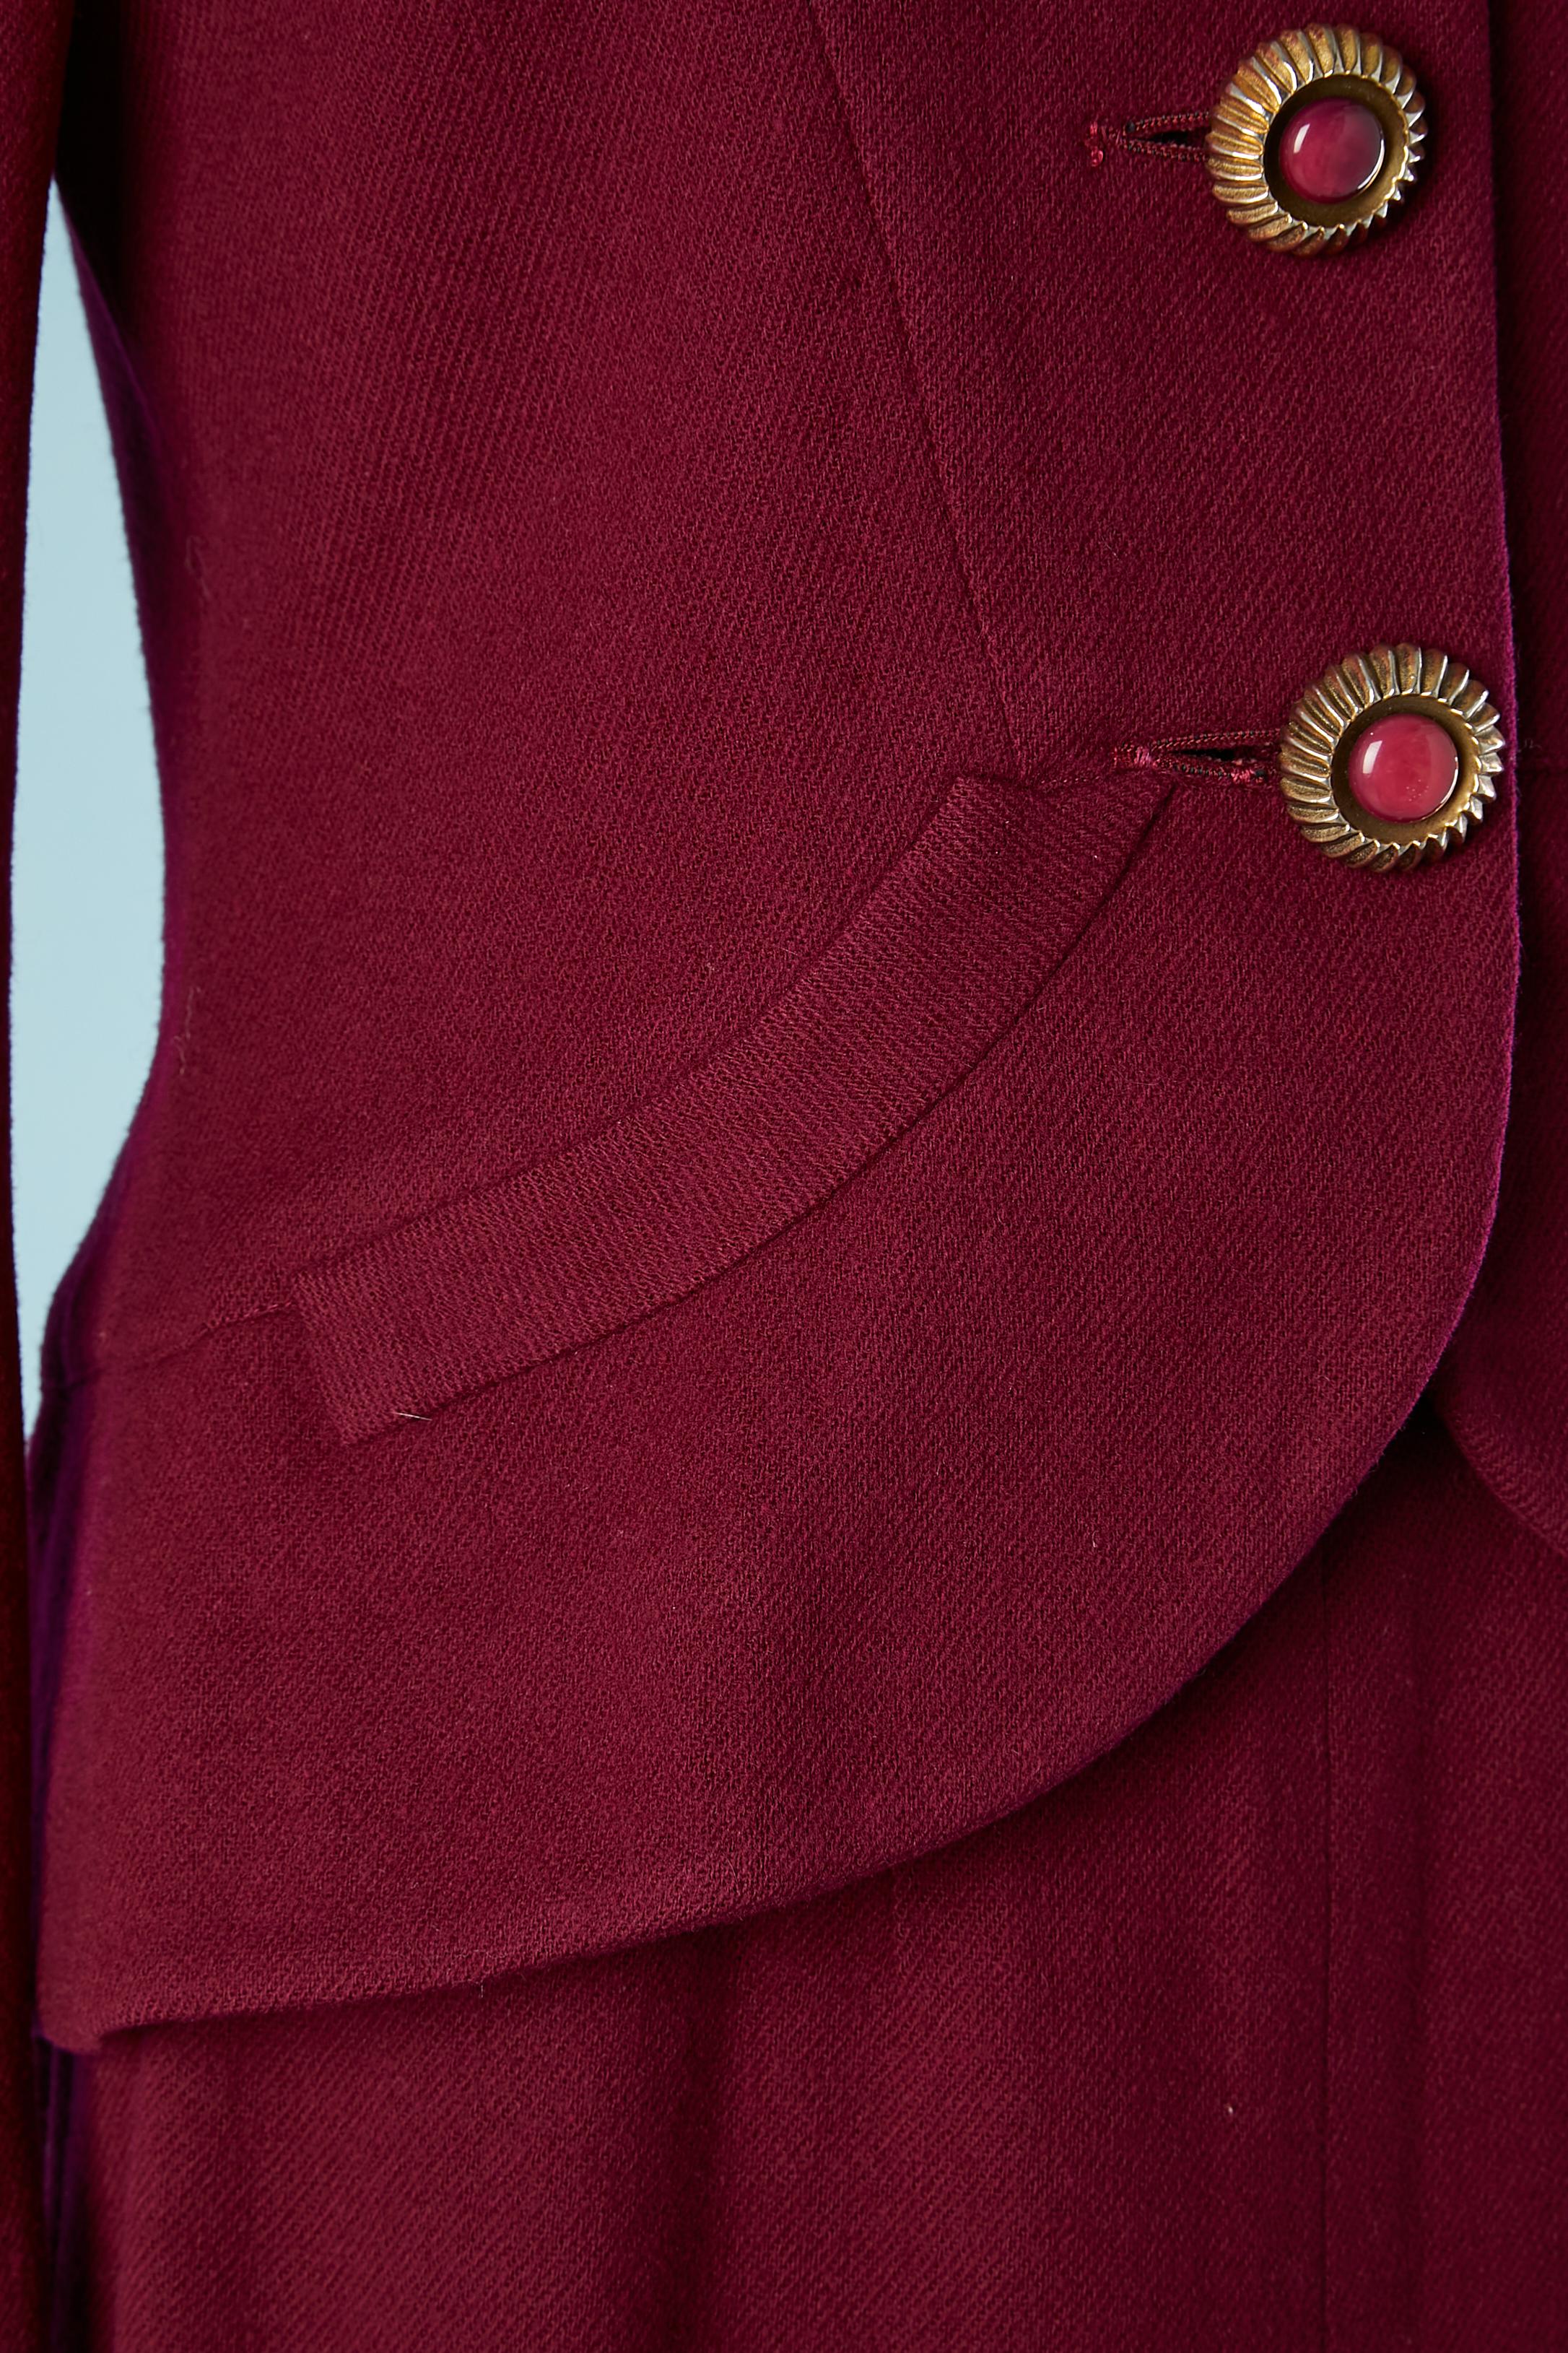 Red Burgundy skirt-suit in wool with jewellery buttons Circa 1940/50 For Sale